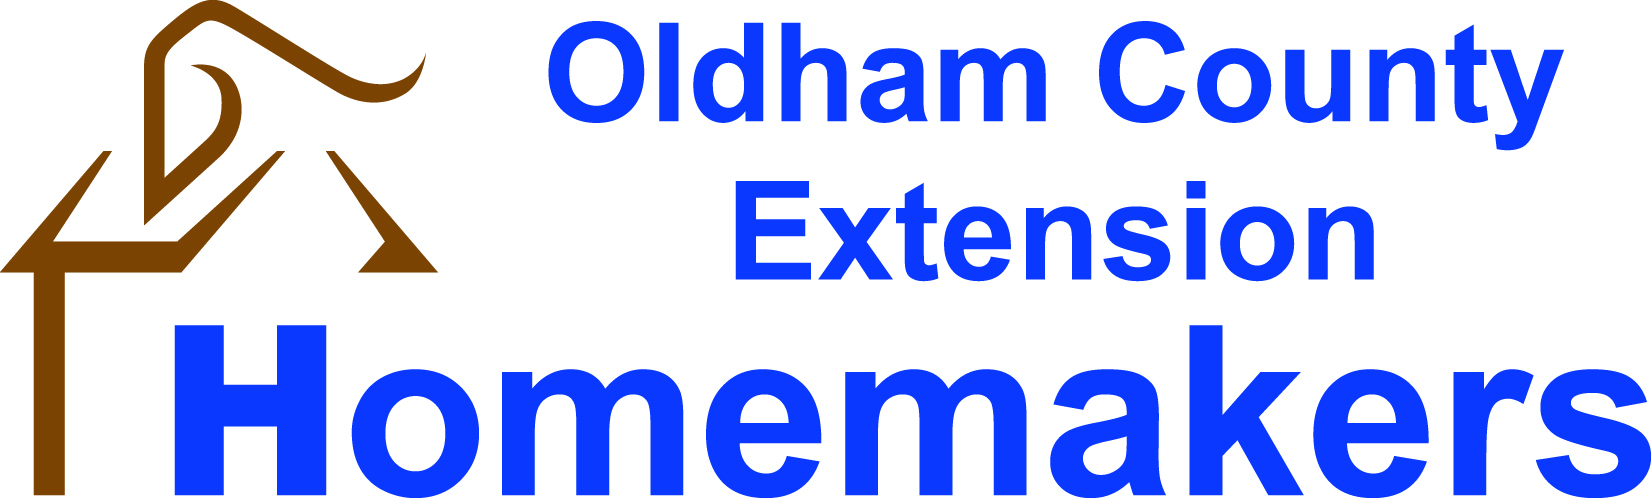 Oldham County Extension Homemakers